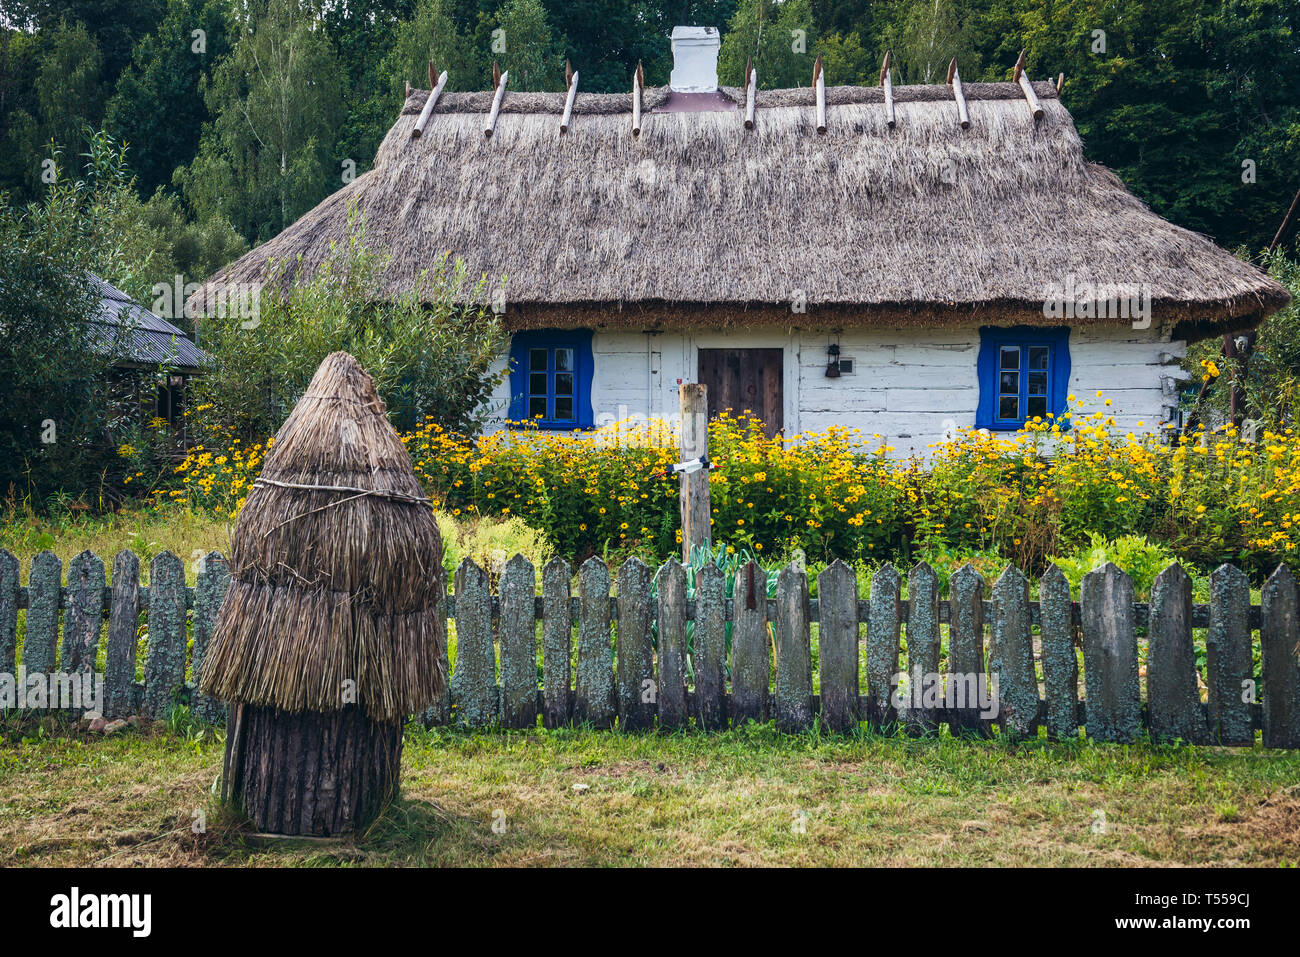 Wooden house with thatched roof in Bialowieskie Siolo inn in Budy village, Podlaskie Voivodeship in Poland Stock Photo